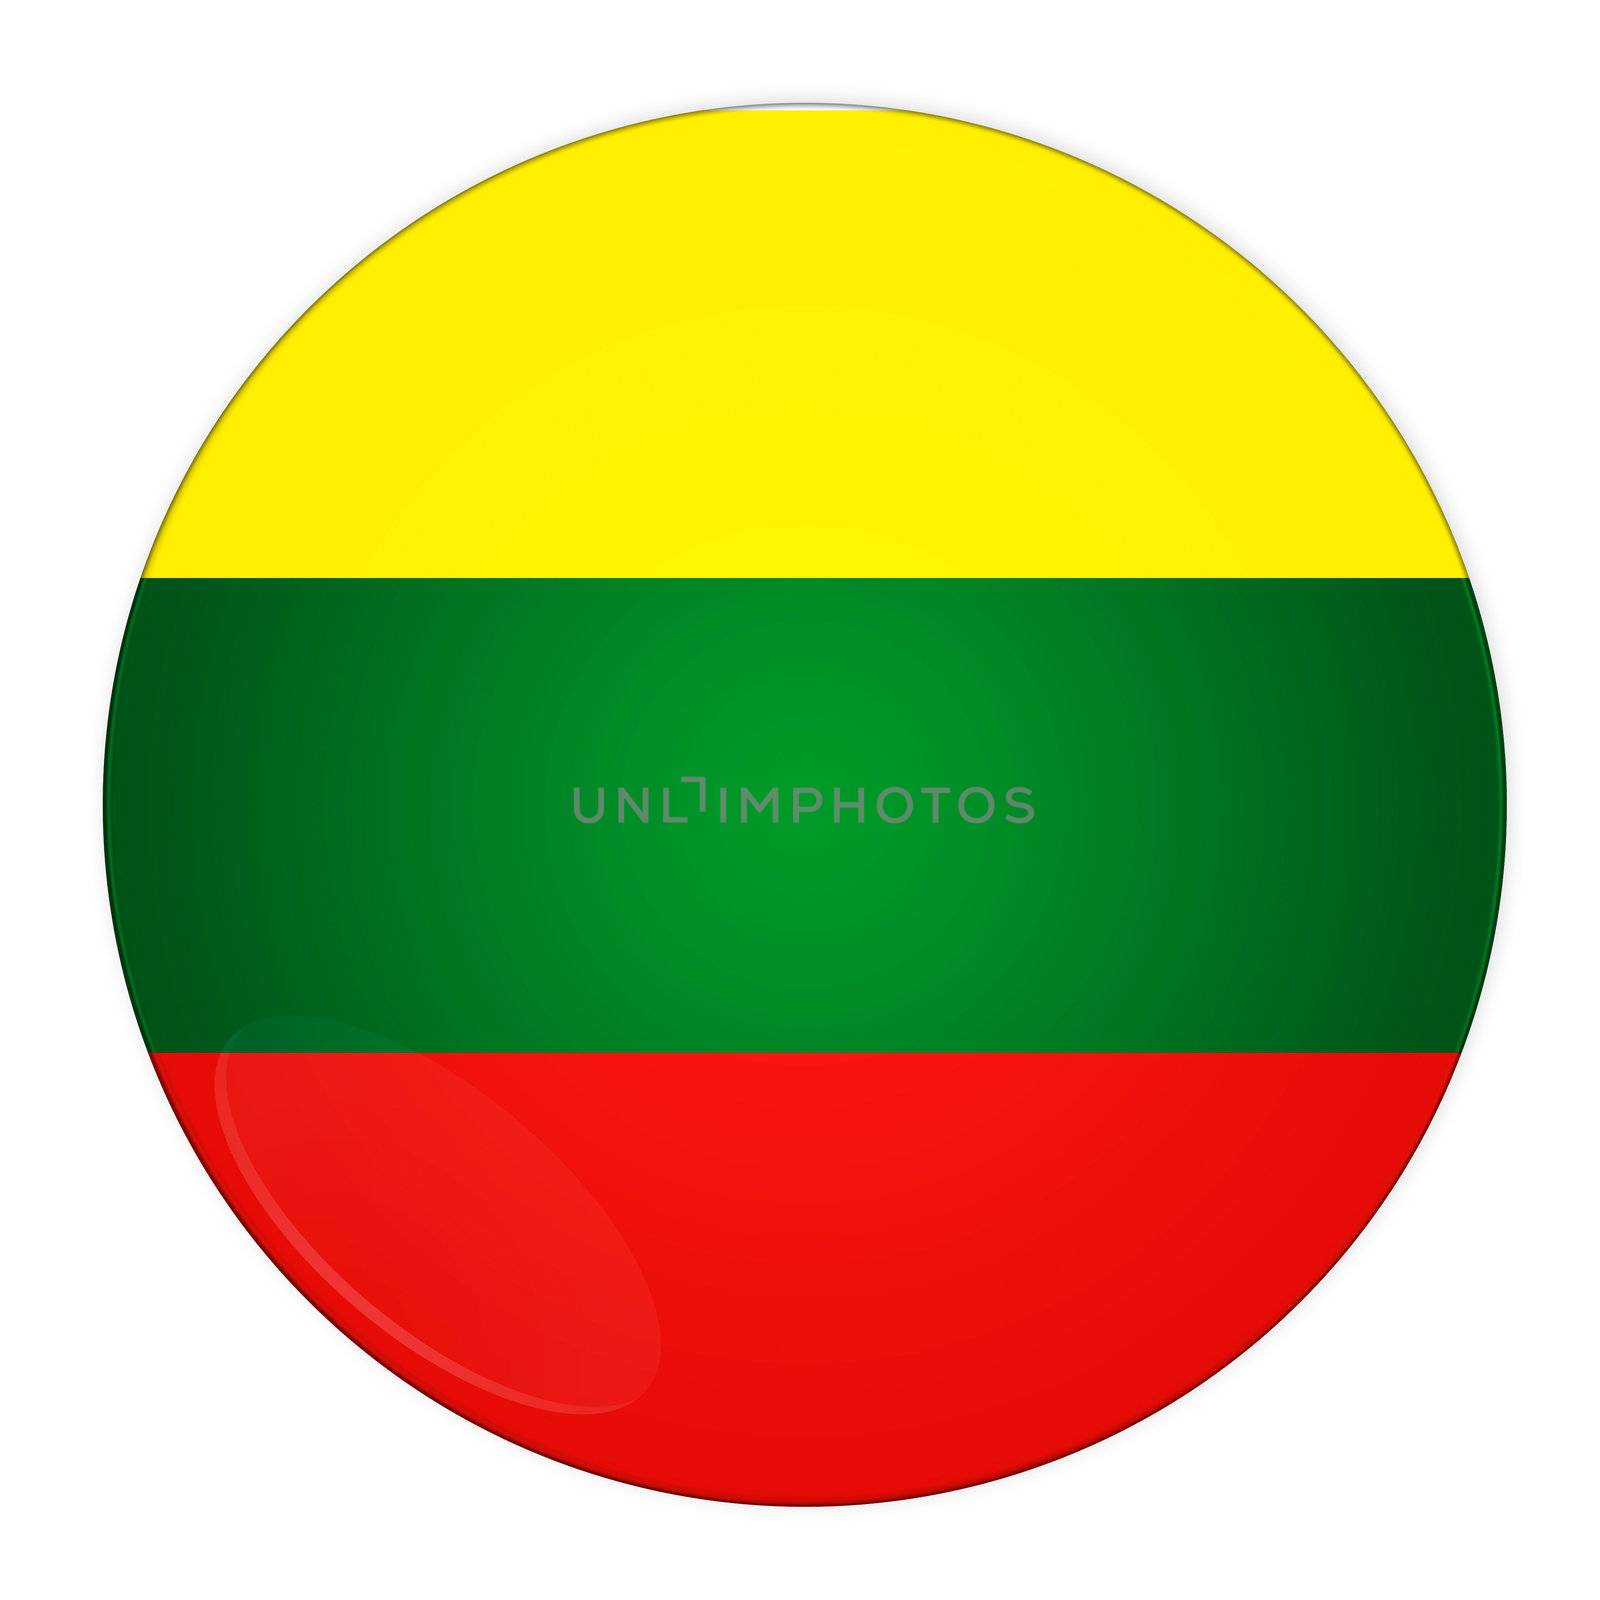 Abstract illustration: button with flag from Lithuania country